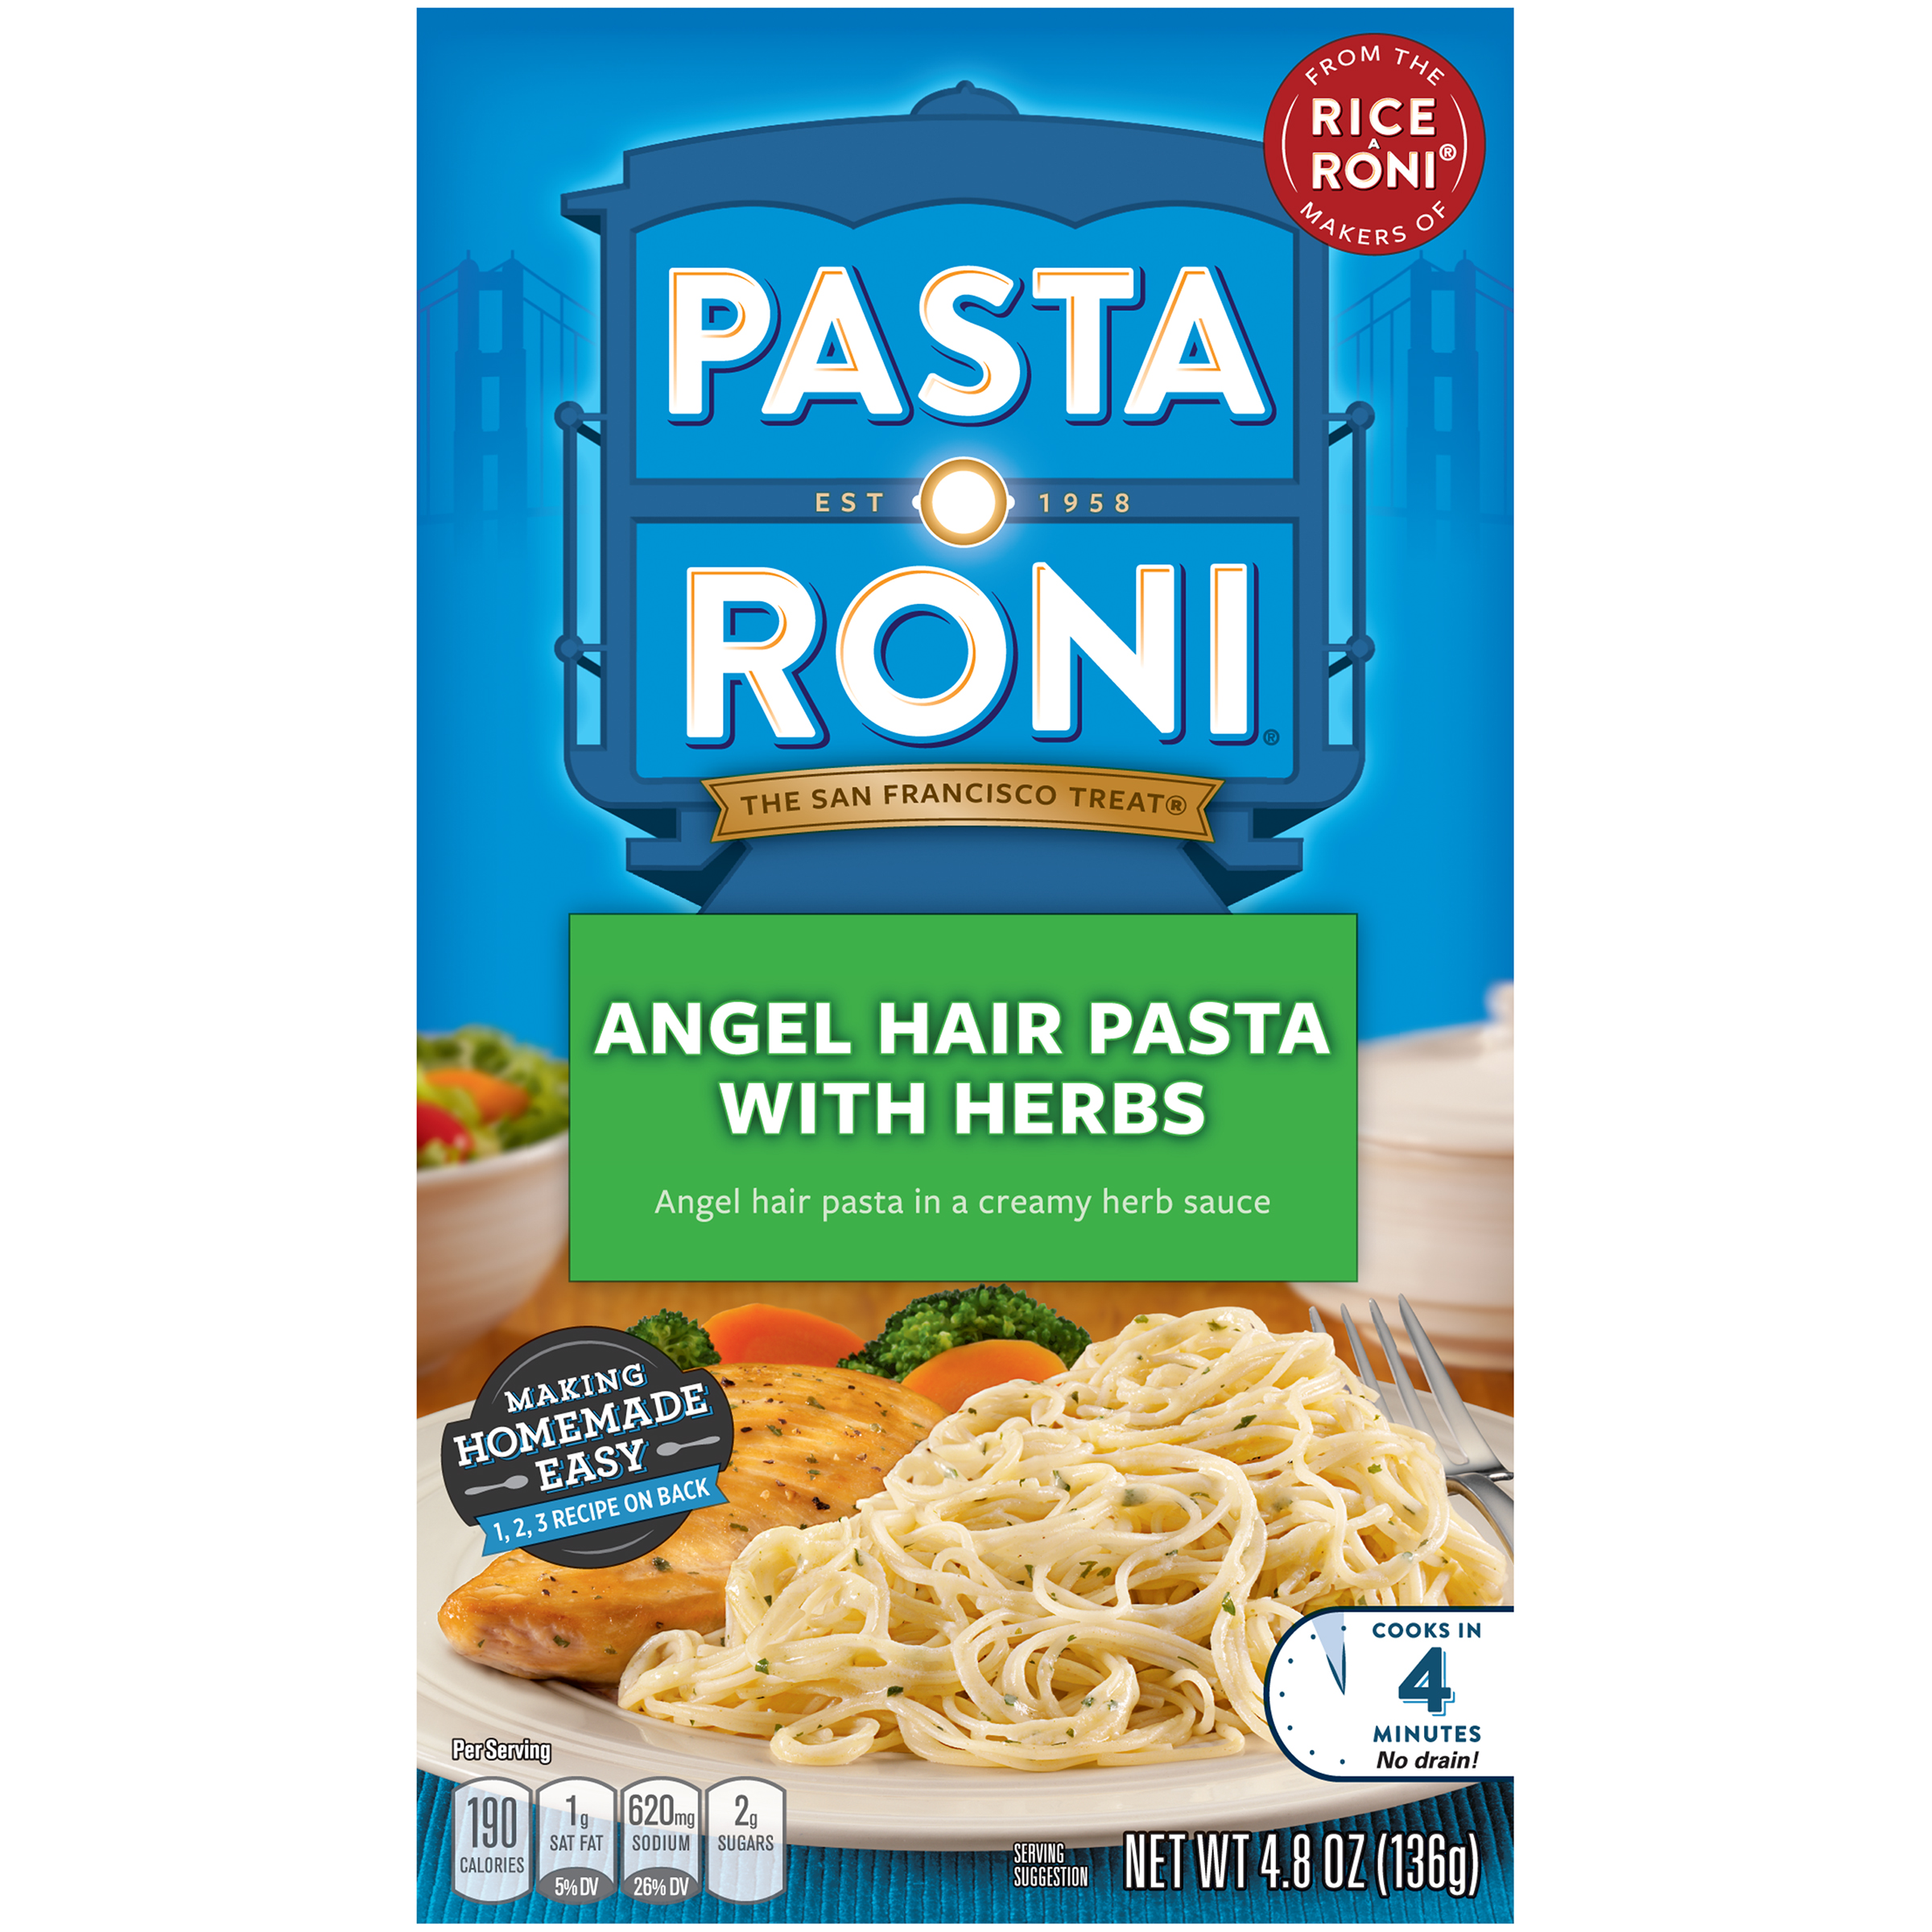 Pasta Roni Angel Hair Pasta with Herbs, 4.8 oz (136 g)